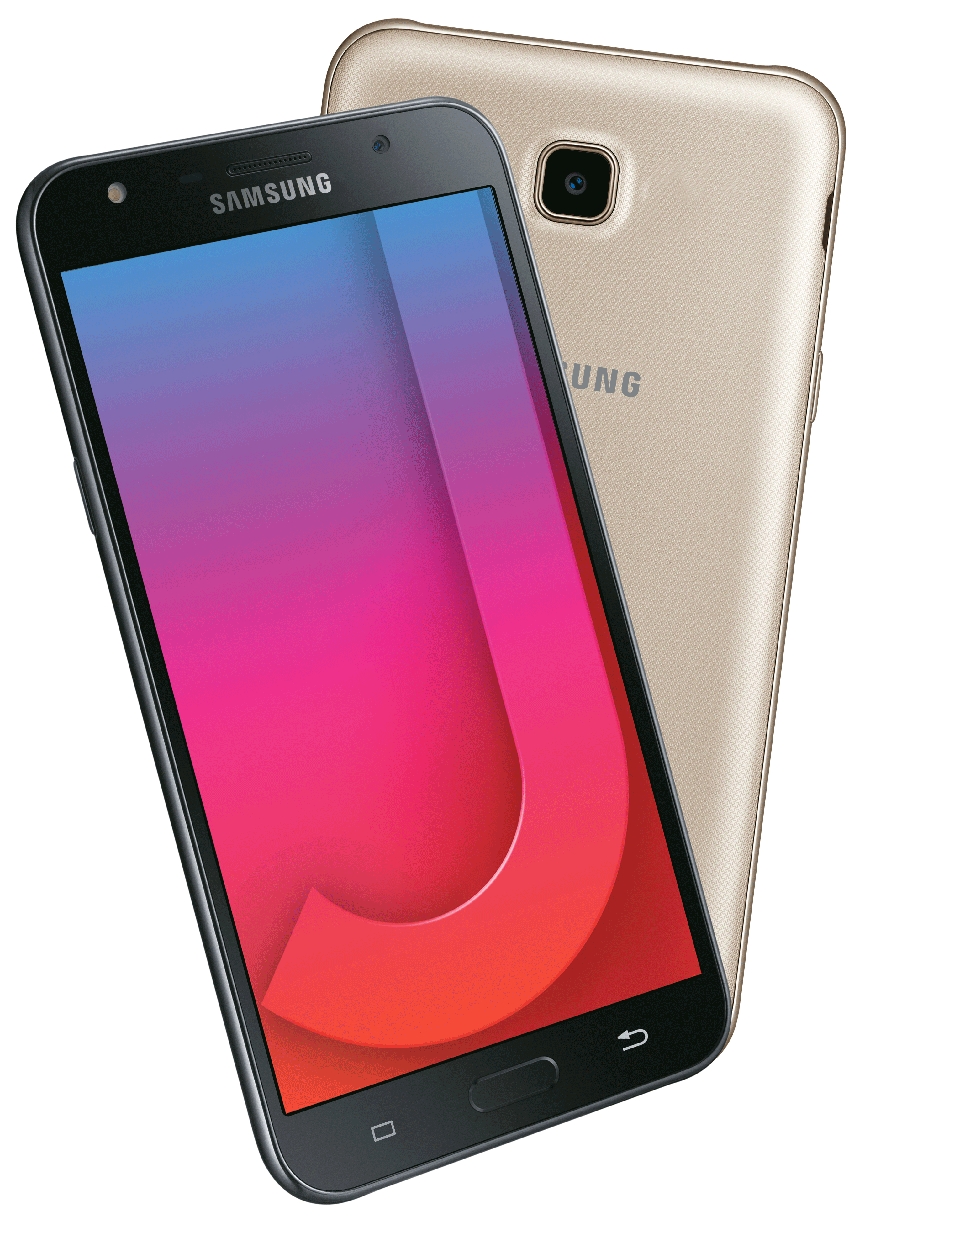 New variant of Samsung Galaxy J7 Nxt launched